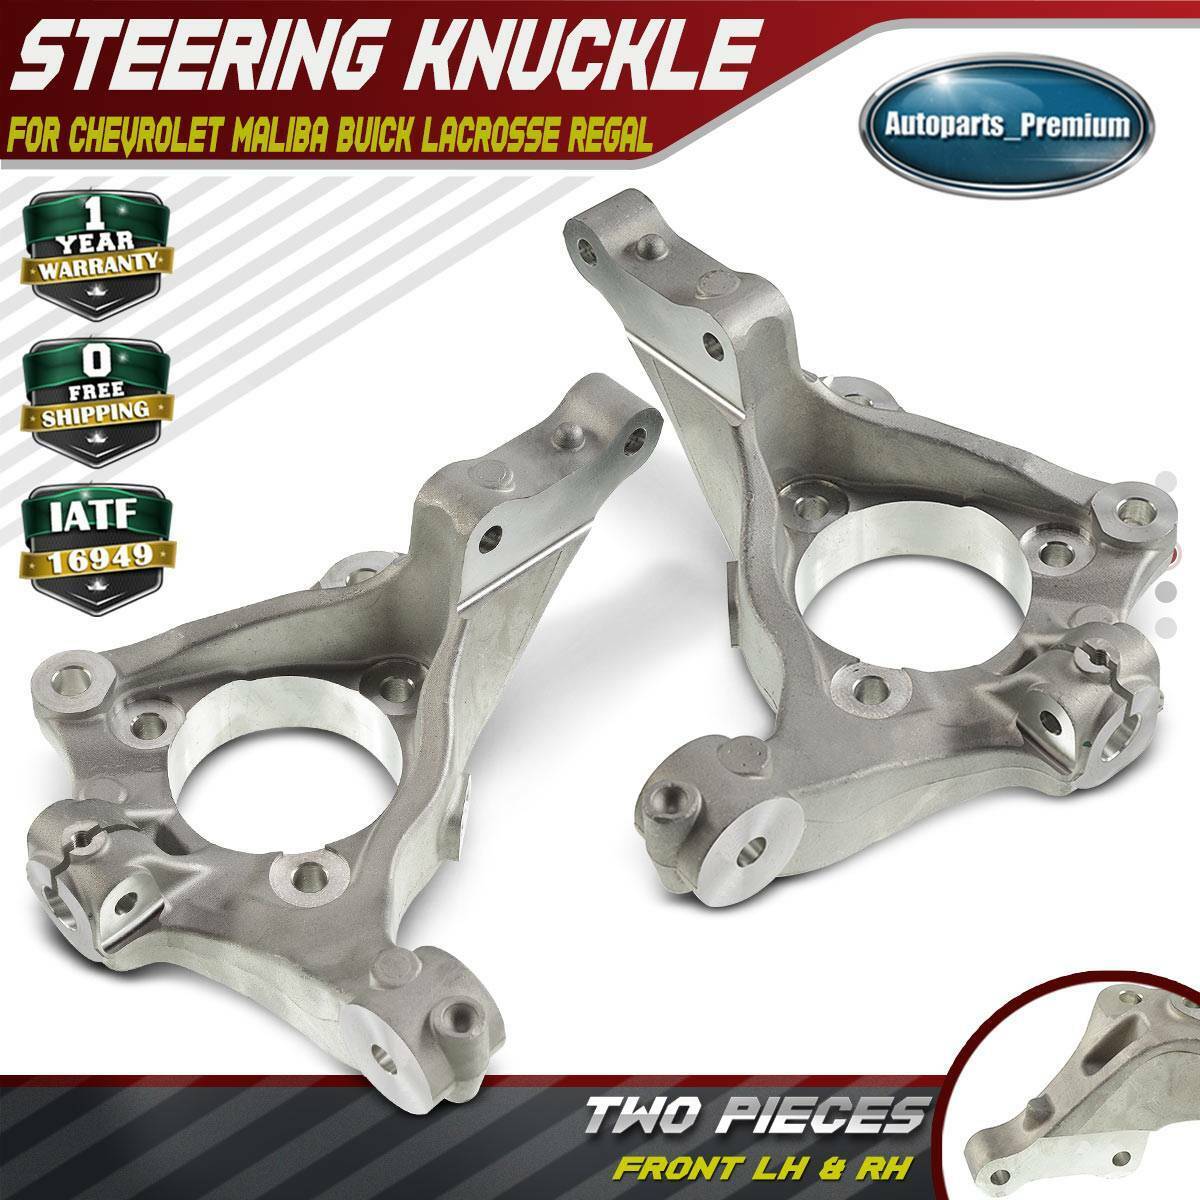 2x Steering Knuckle Front Left & Right for Buick LaCrosse Regal Chevrolet Malibu